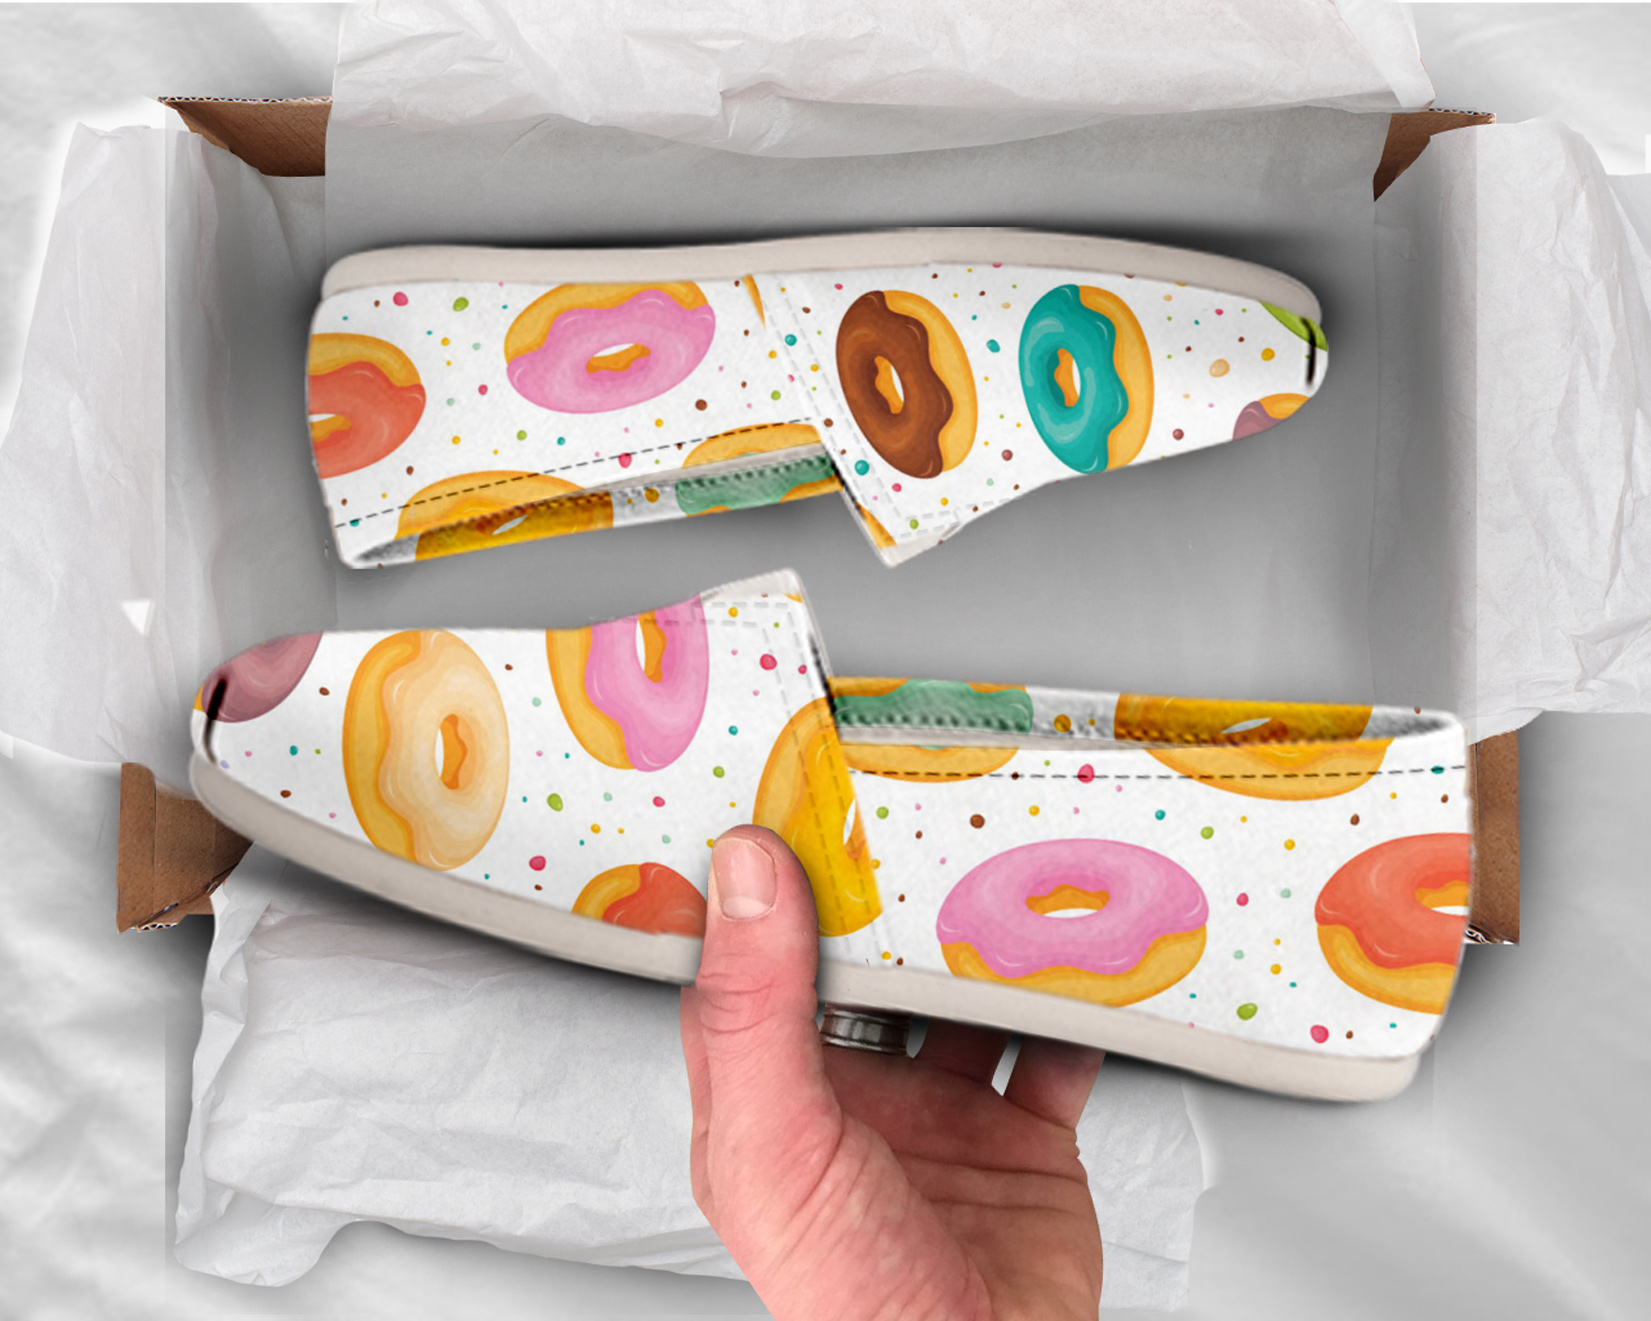 Donut Slip-On Shoes | Custom Canvas Sneakers For Kids & Adults